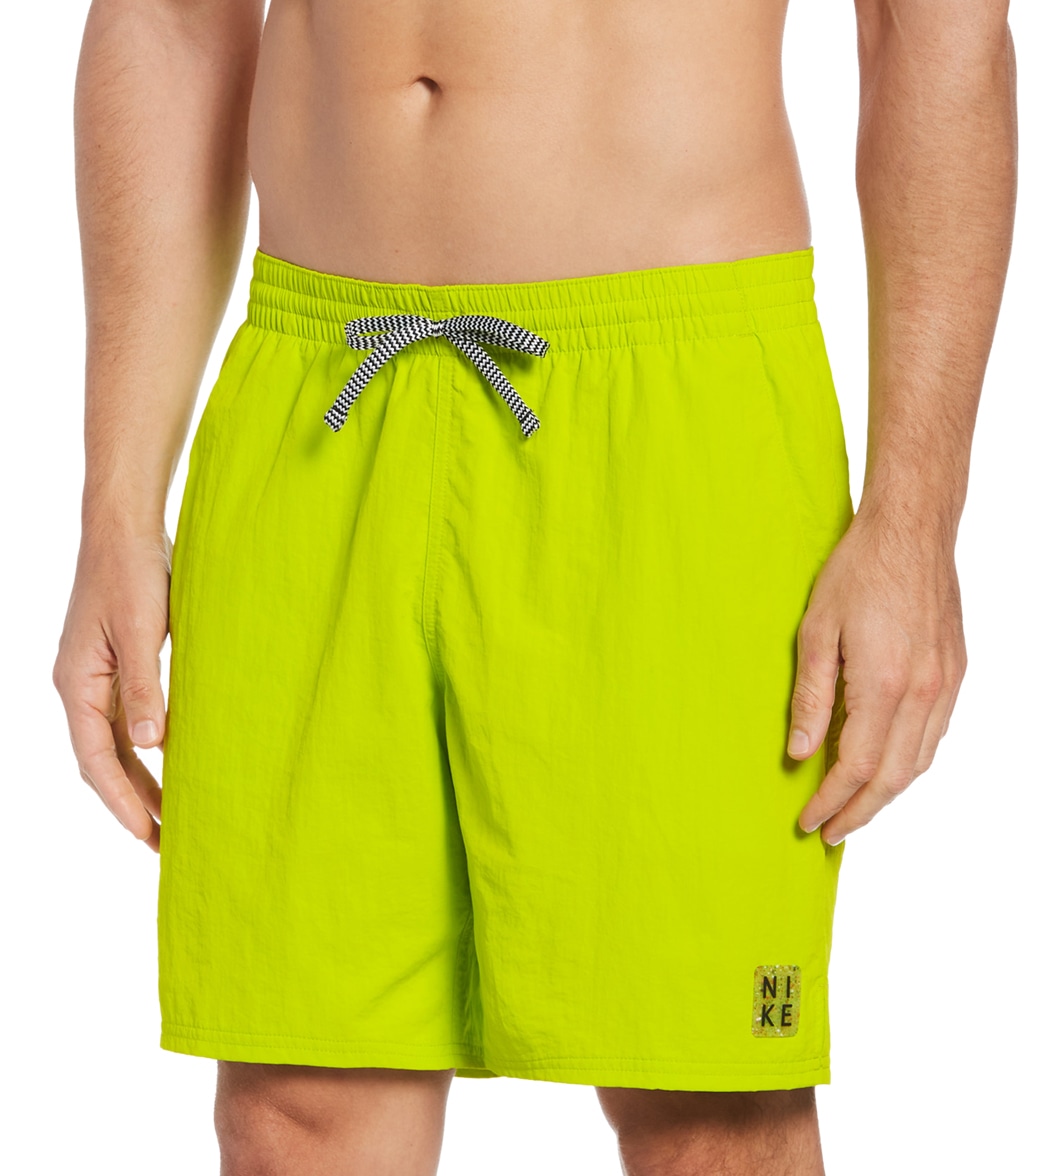 Nike Men's 18 Essential Volley Short - Atomic Green Large - Swimoutlet.com